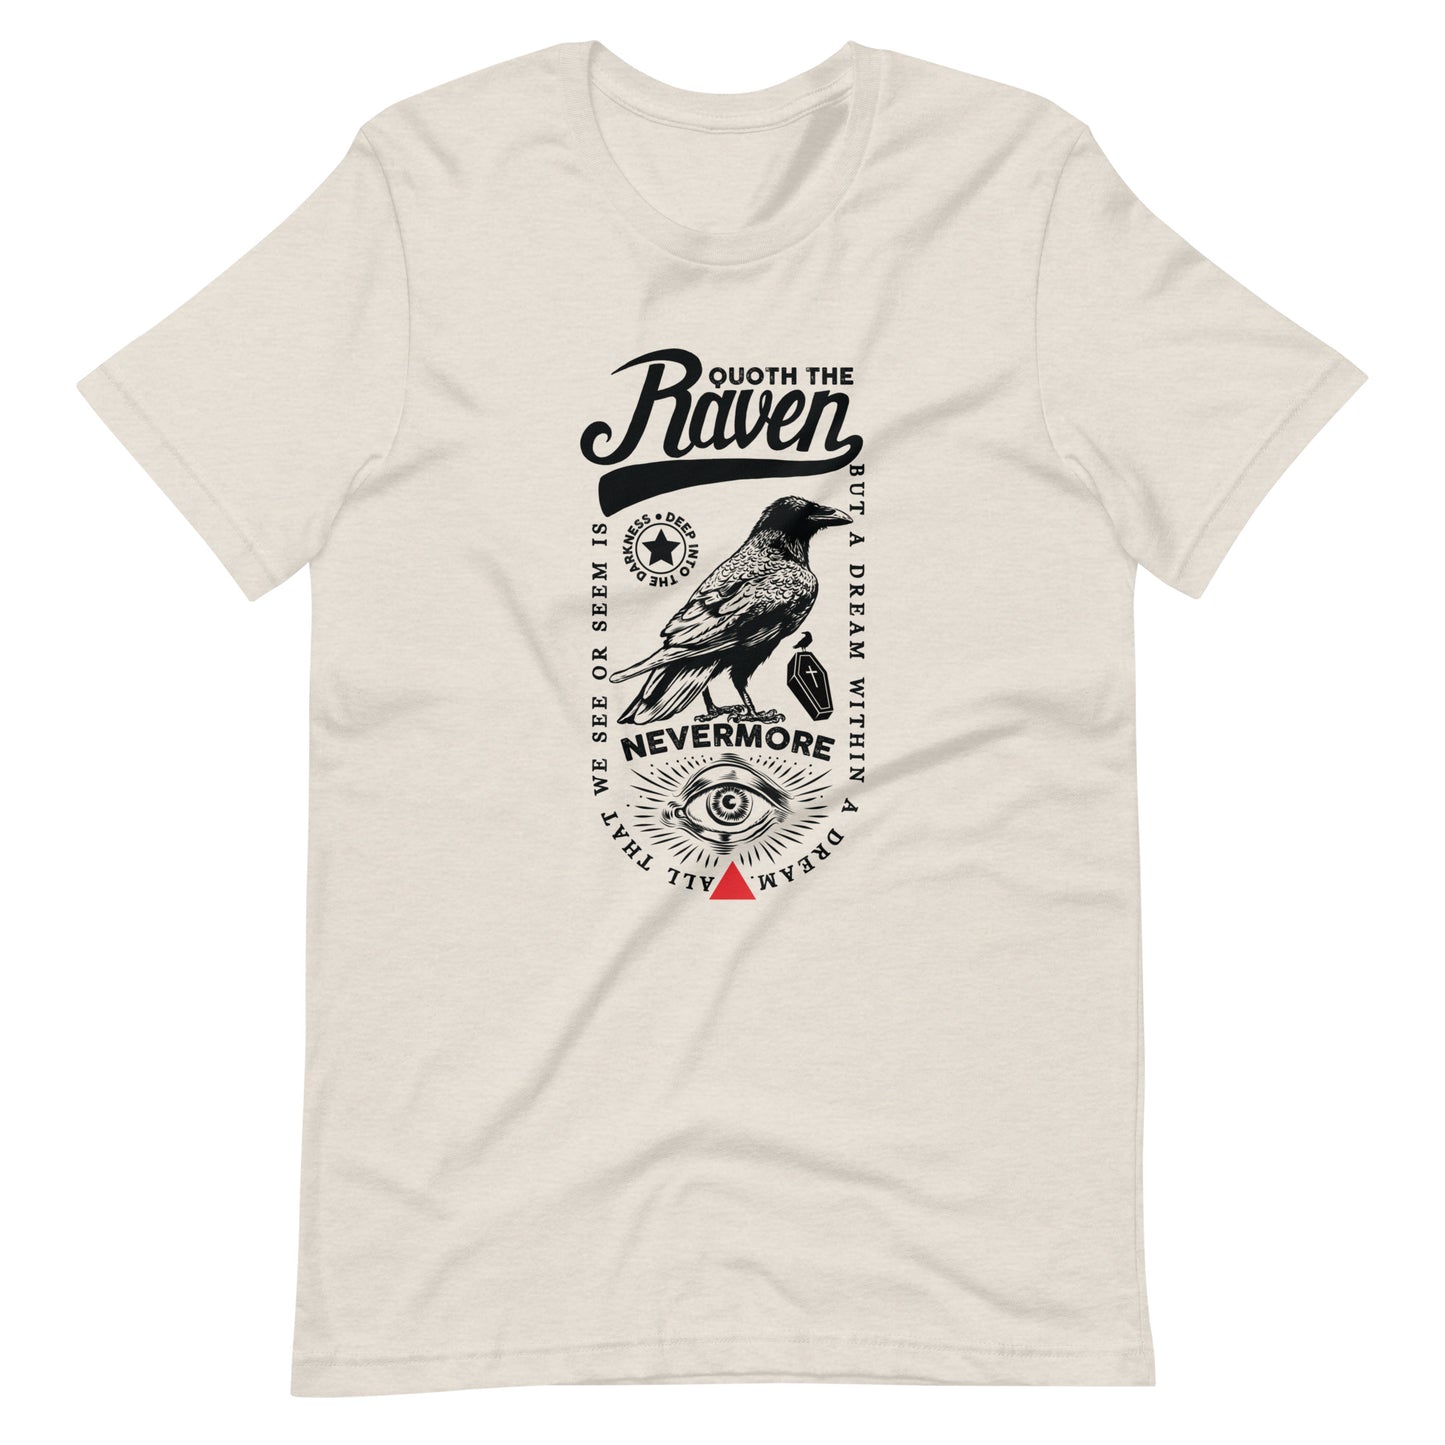 Quoth the Raven Nevermore Loaded - Men's t-shirt - Heather Dust Front